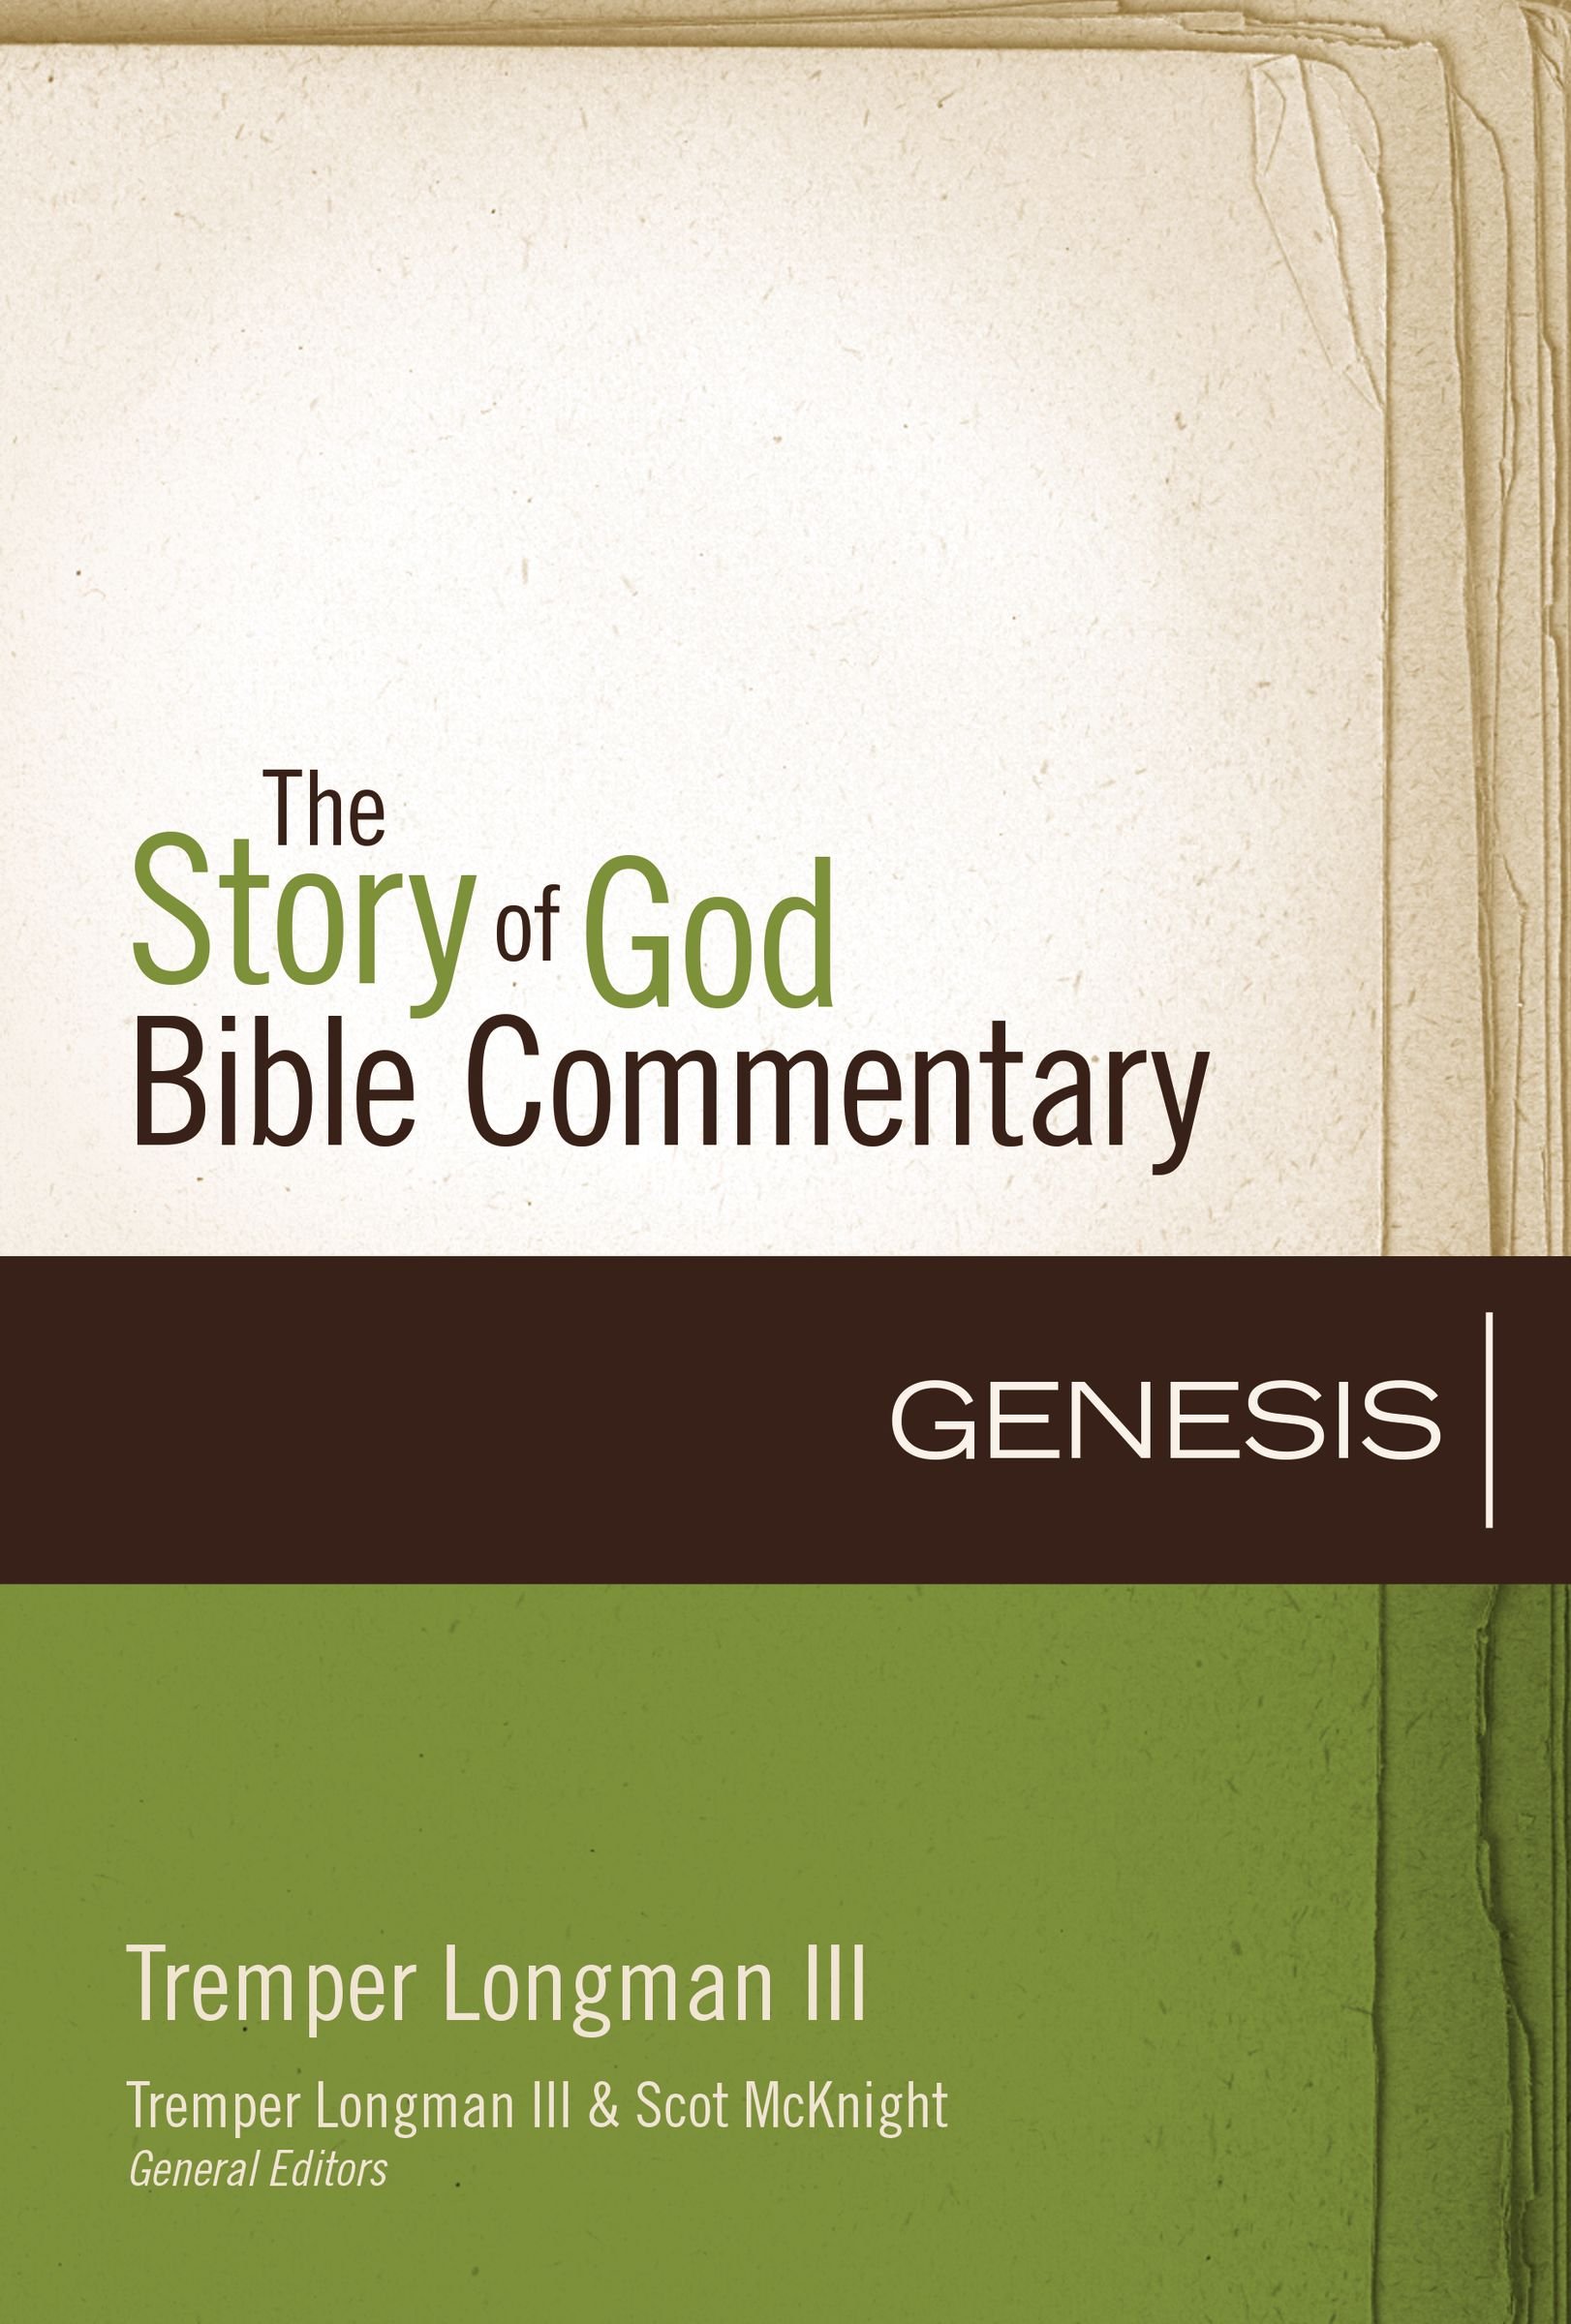 GENESIS (THE STORY OF GOD BIBLE COMMENTARY), by Tremper Longman III